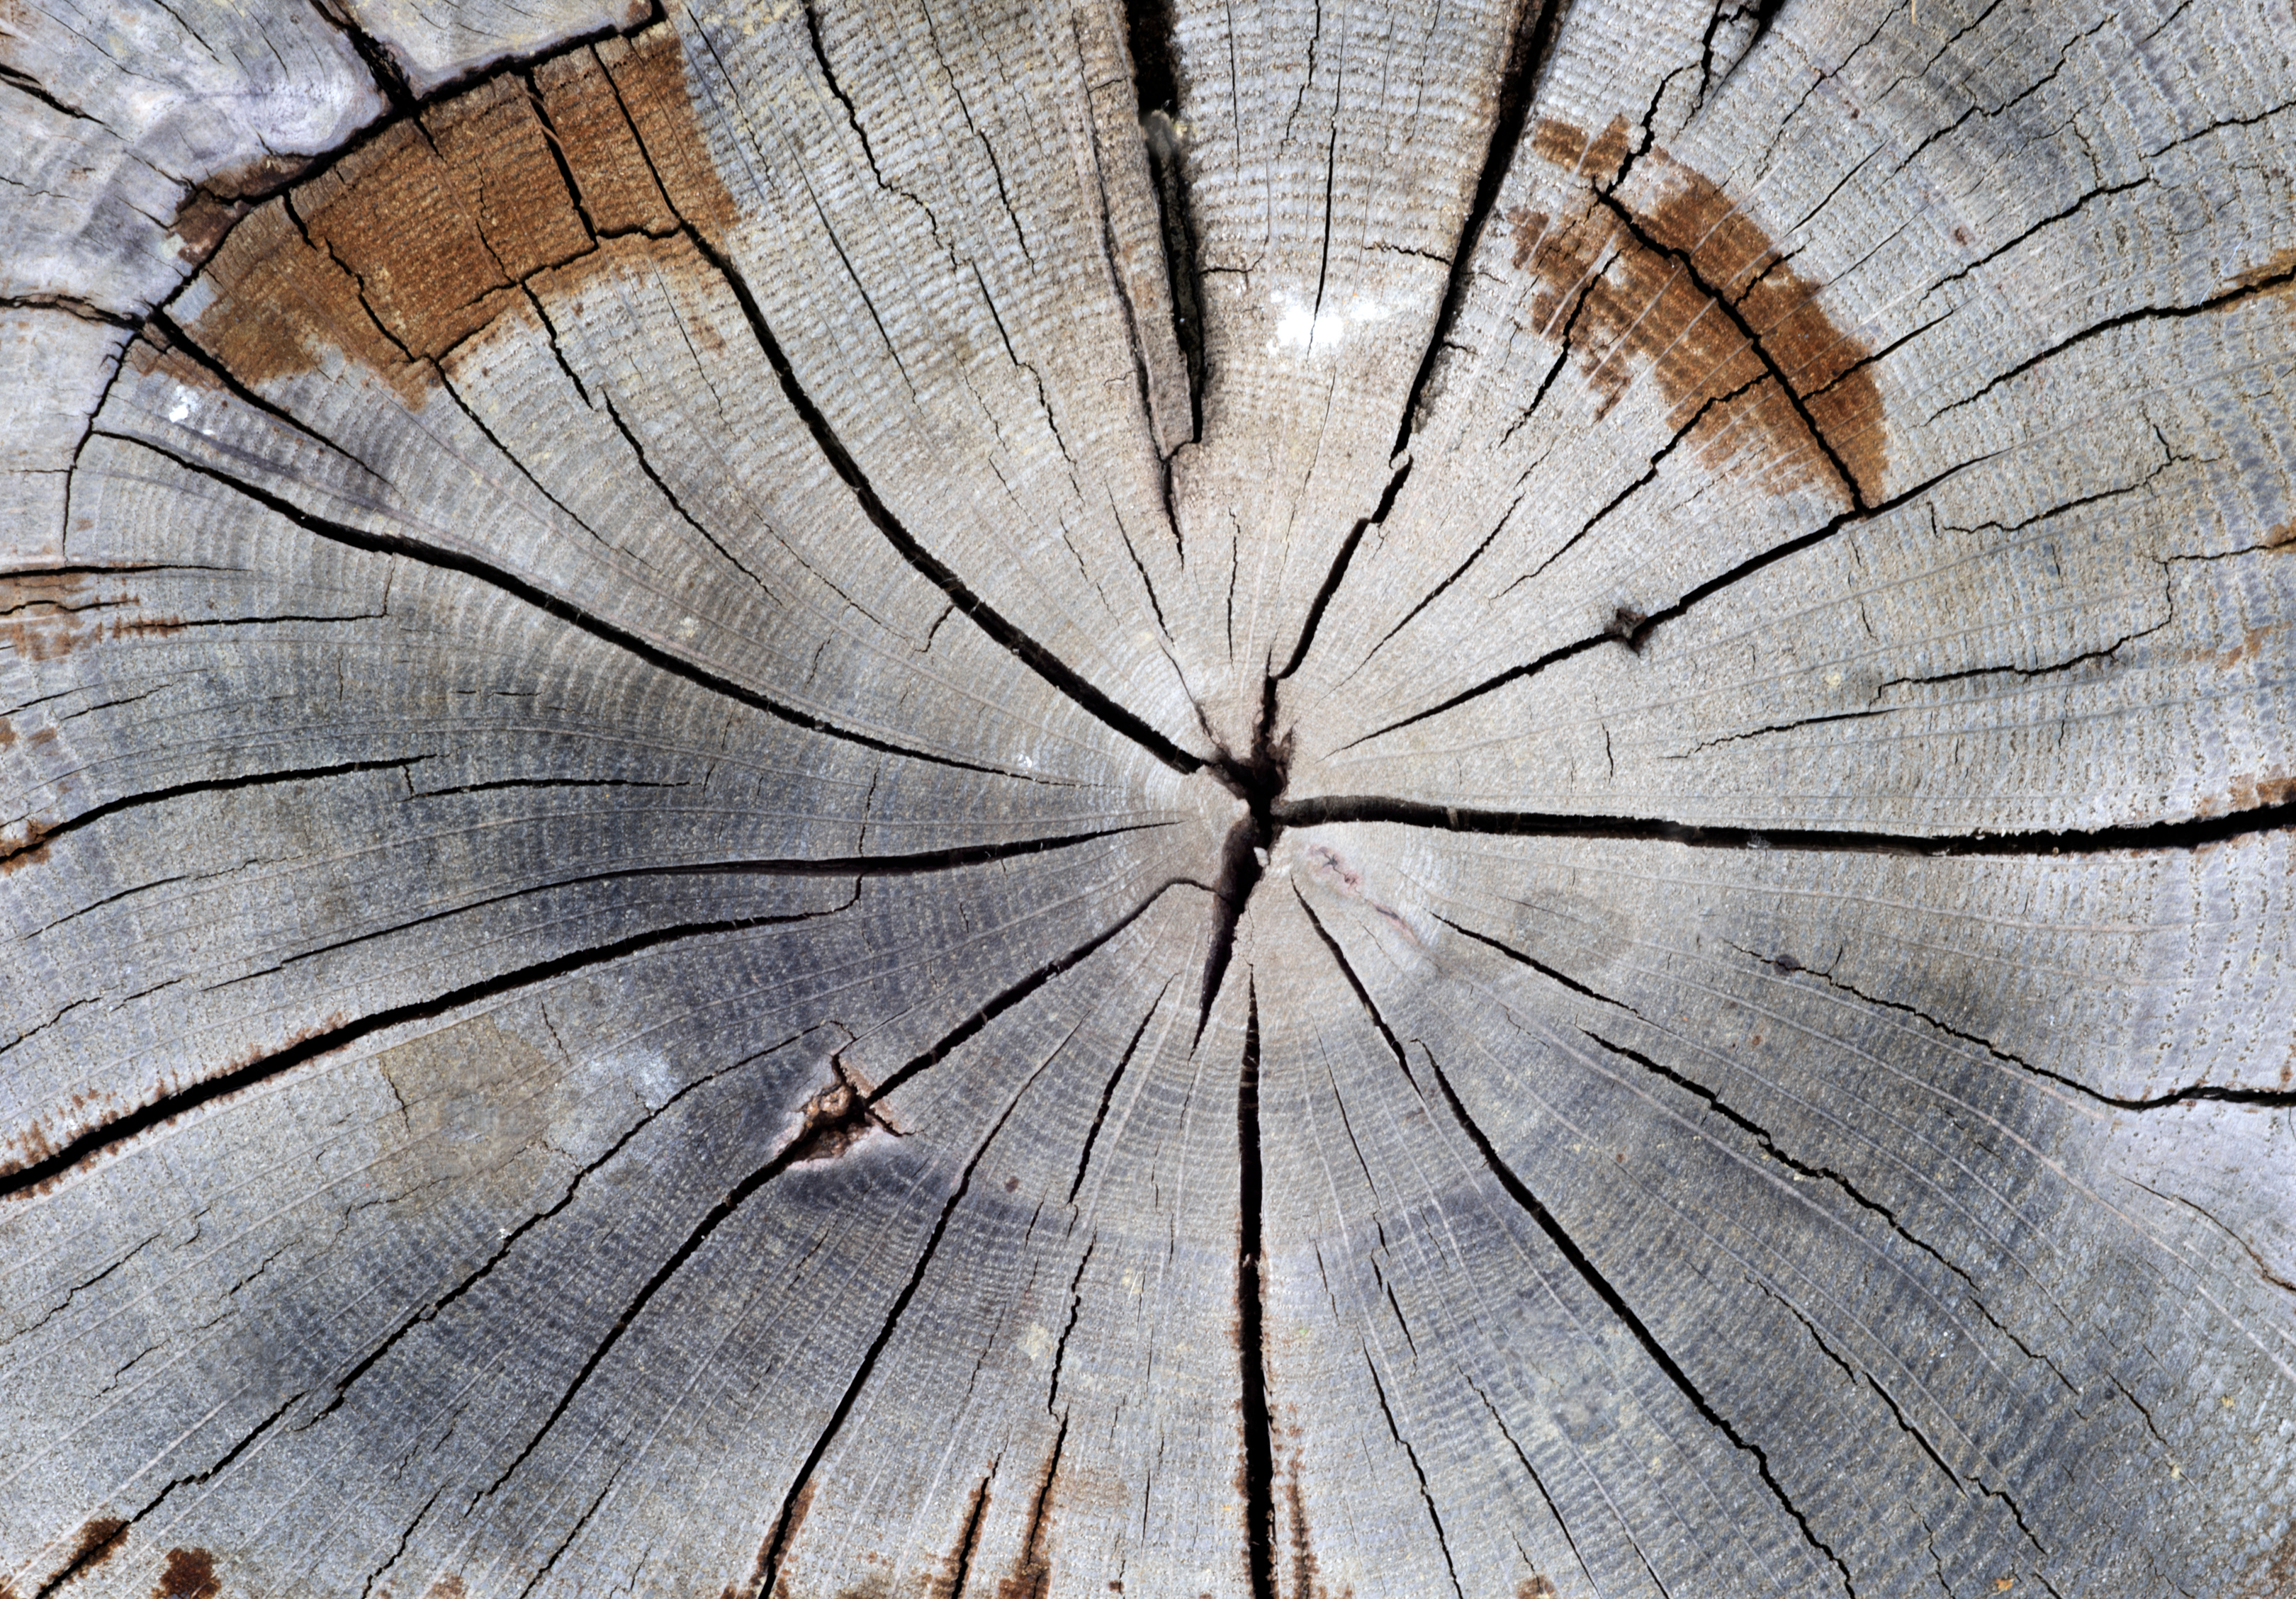 Cracked pine-tree trunk in cross section